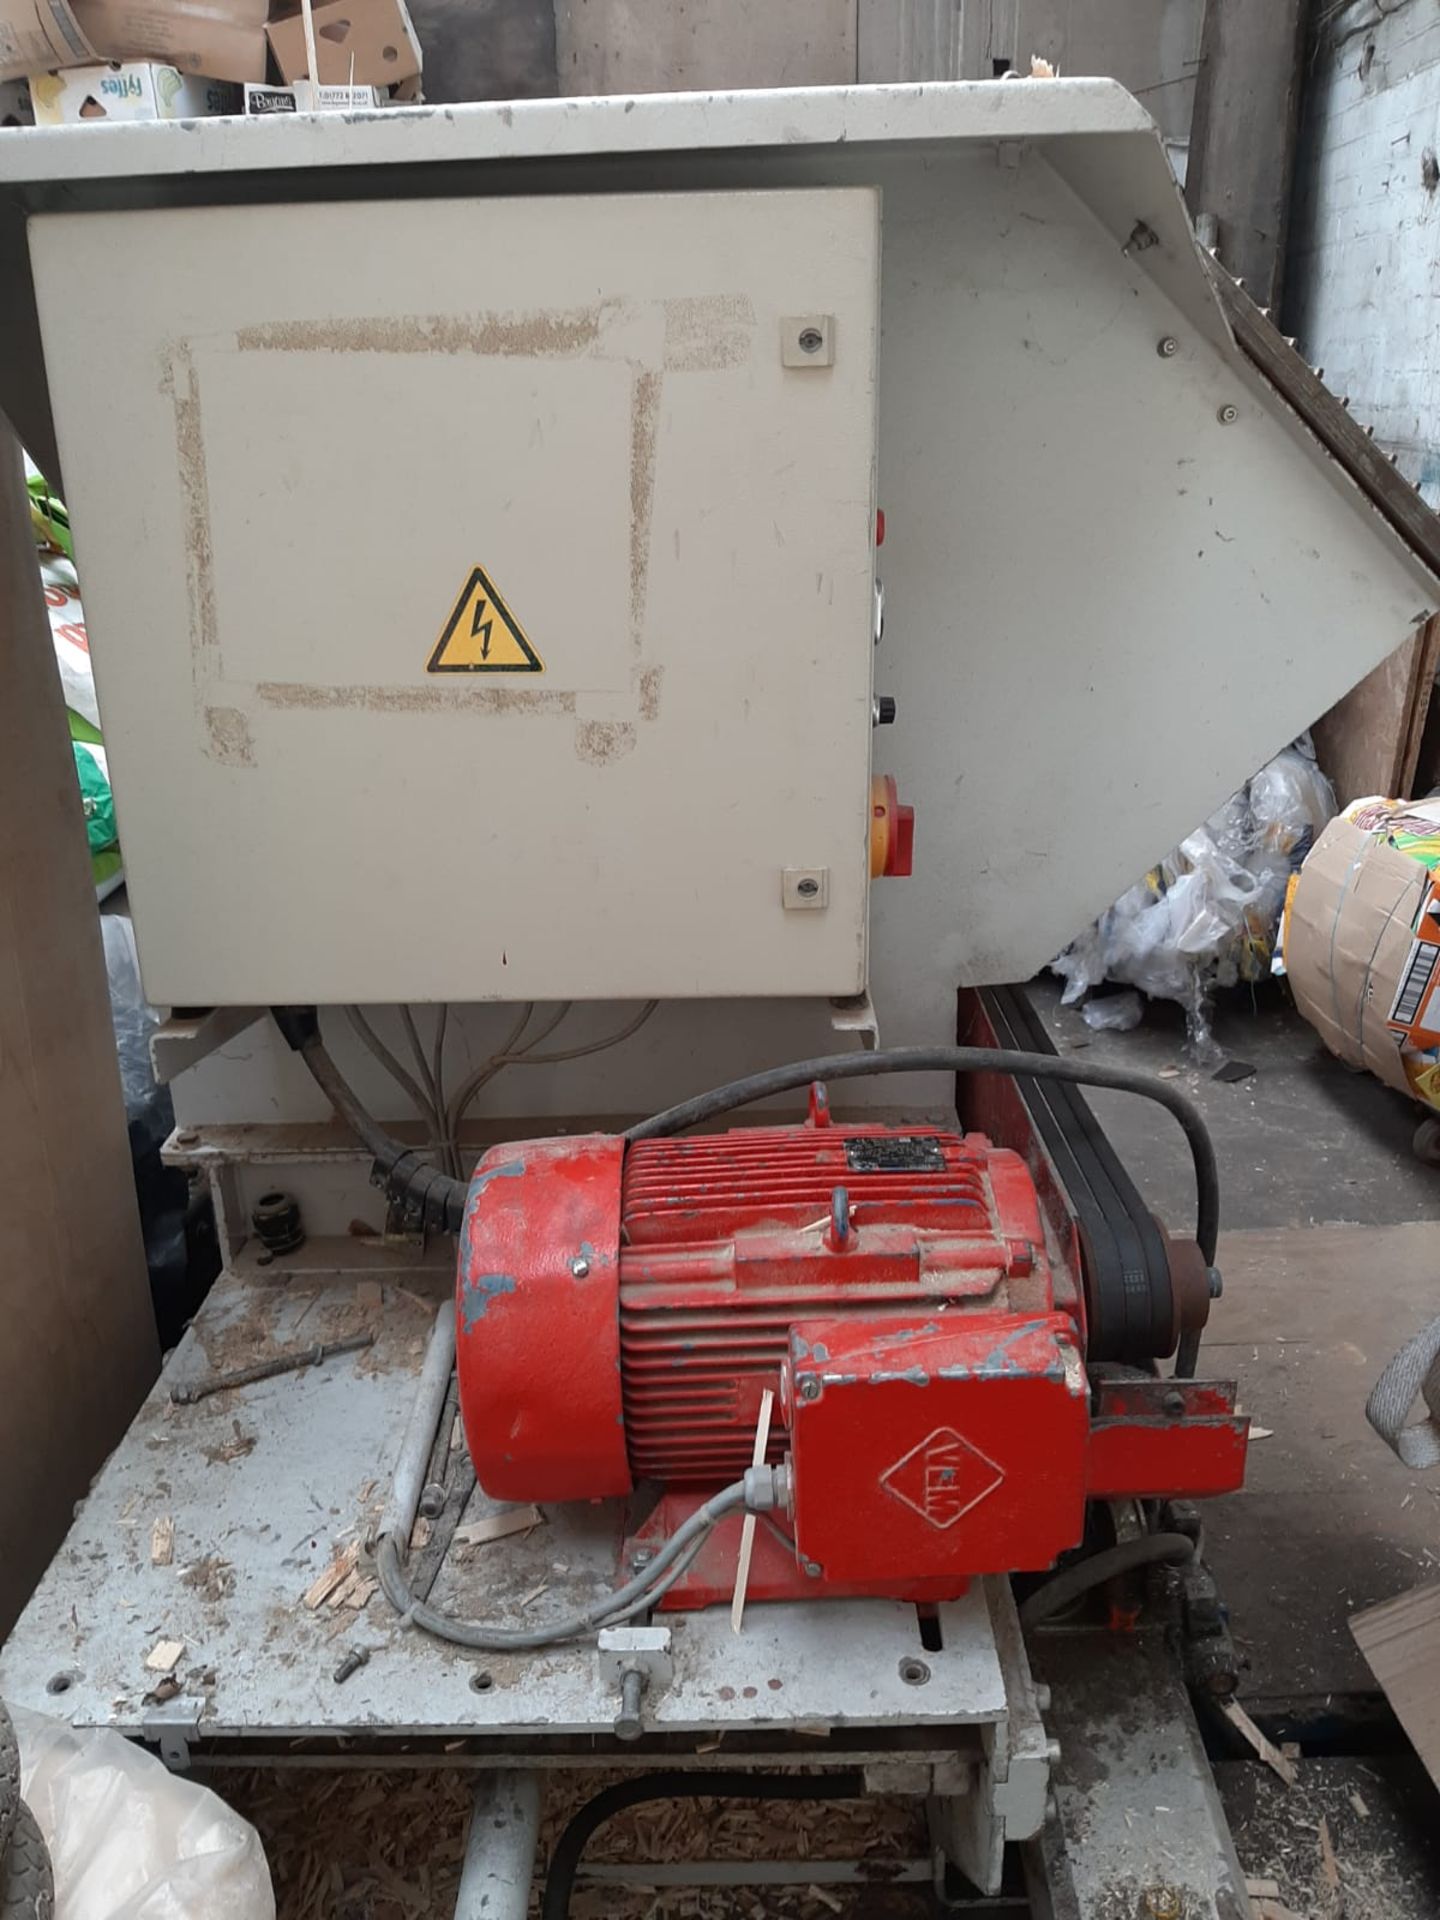 VECOPLAN VAZ 70/80 BIOMASS WOOD SHREDDER, FULLY OPERATIONAL CAN BE SEEN WORKING *NO VAT* - Image 5 of 6